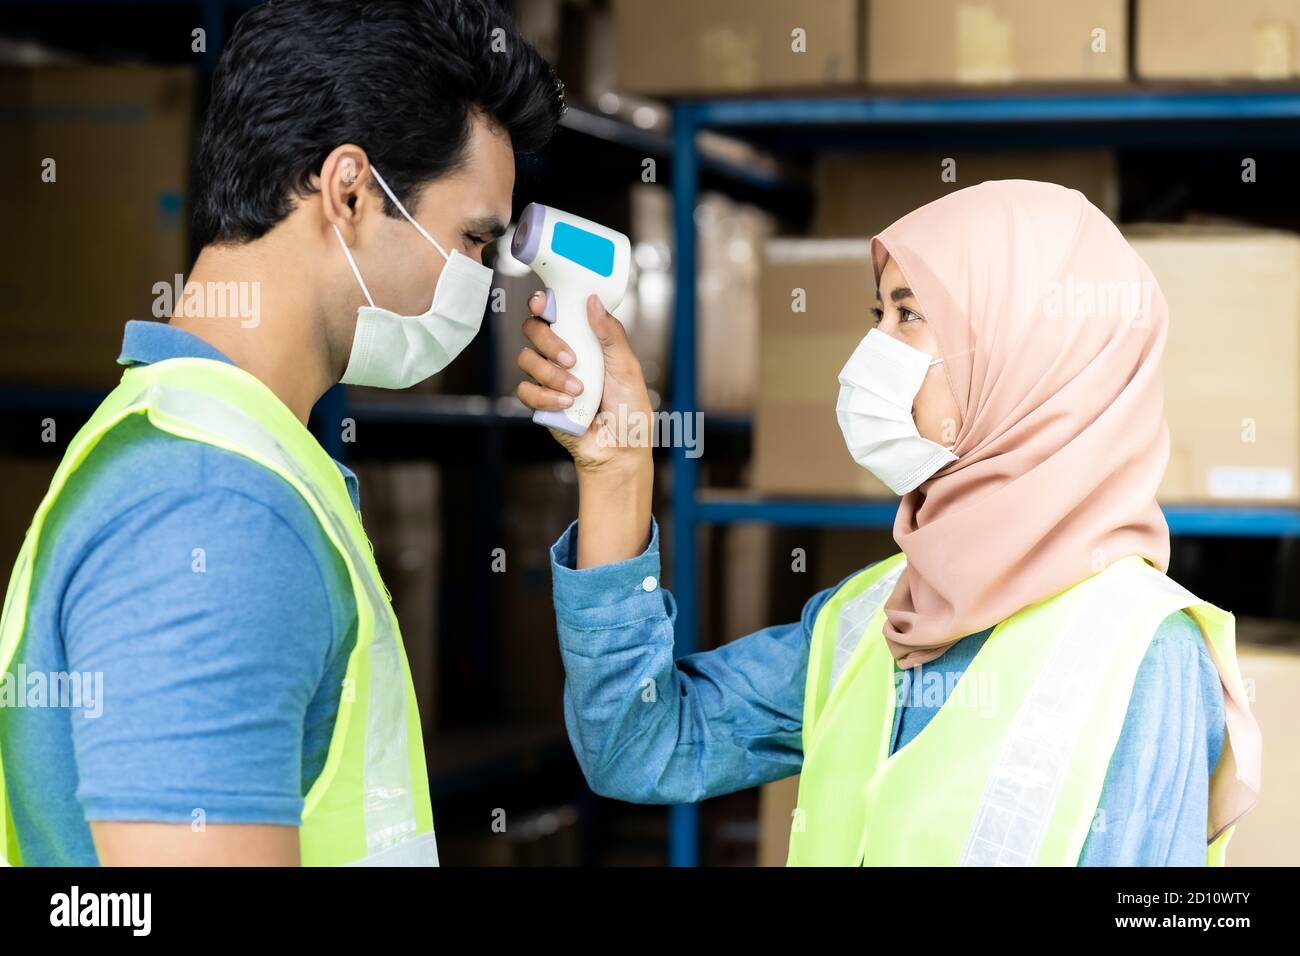 Islam asian warehouse worker taking temperature to worker before getting in factory after reopening from city lockdown from COVID-19 coronavirus pande Stock Photo